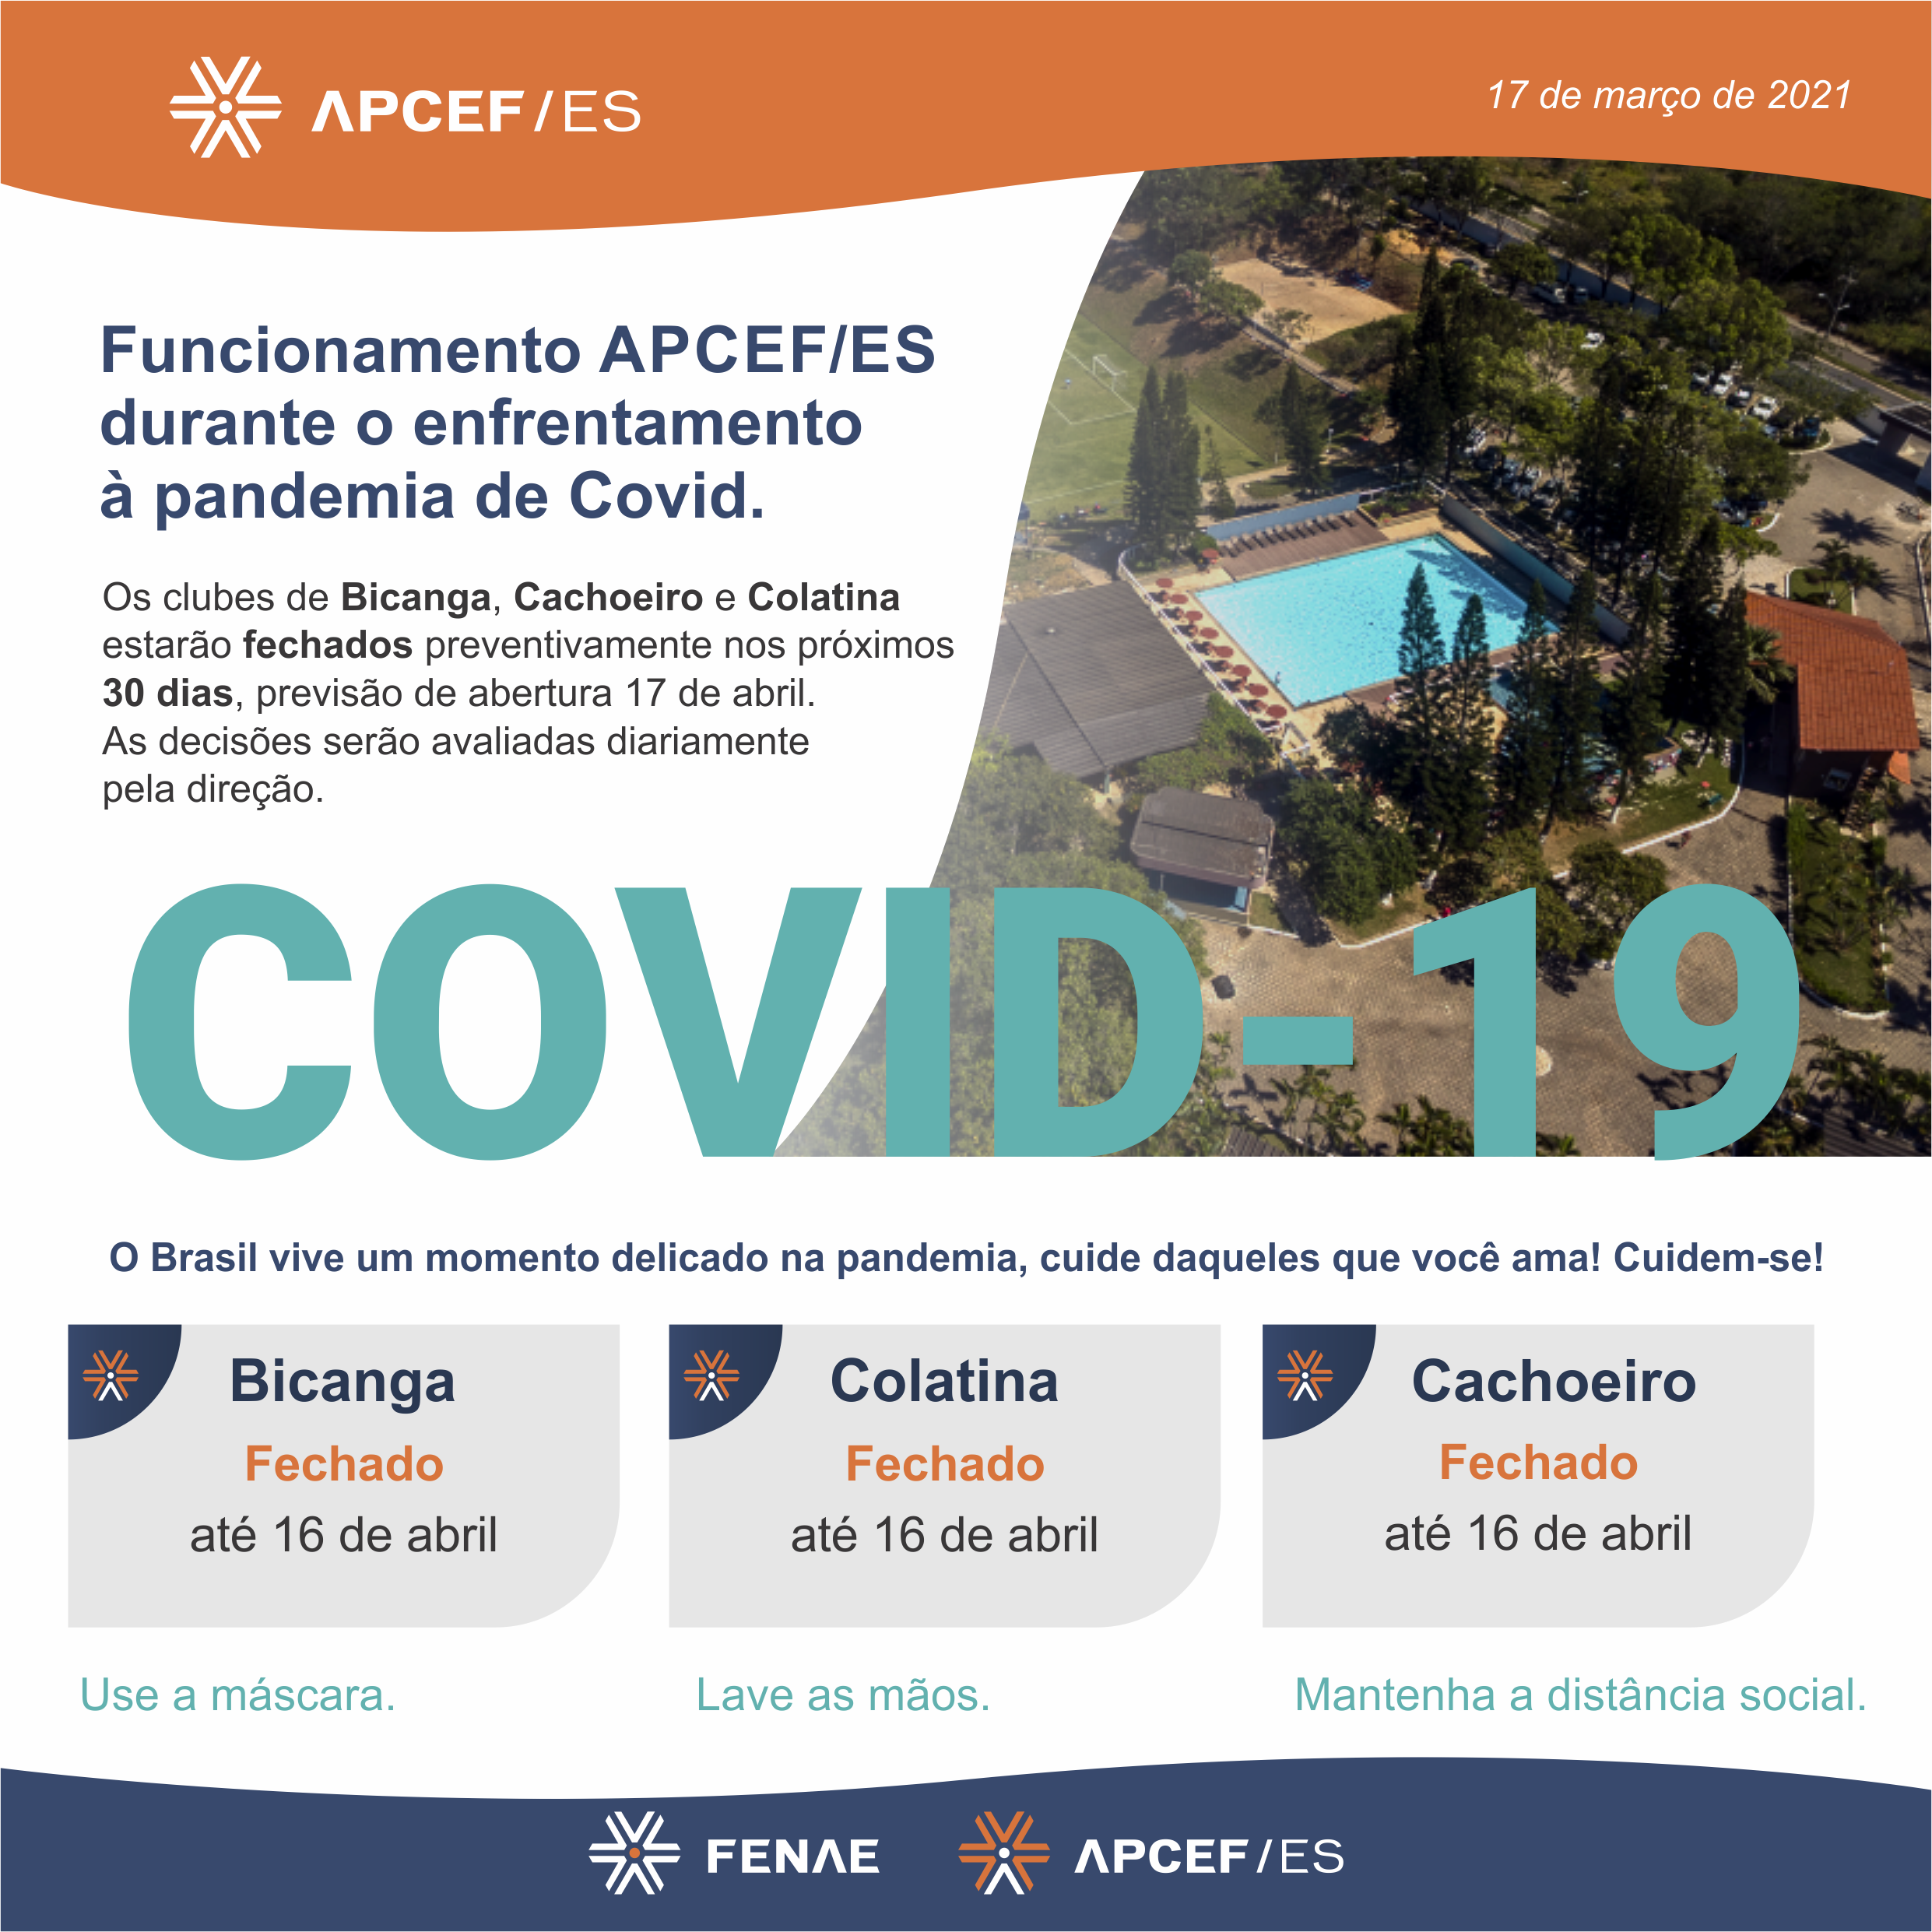 APCEFES Covid - 17marco21.png